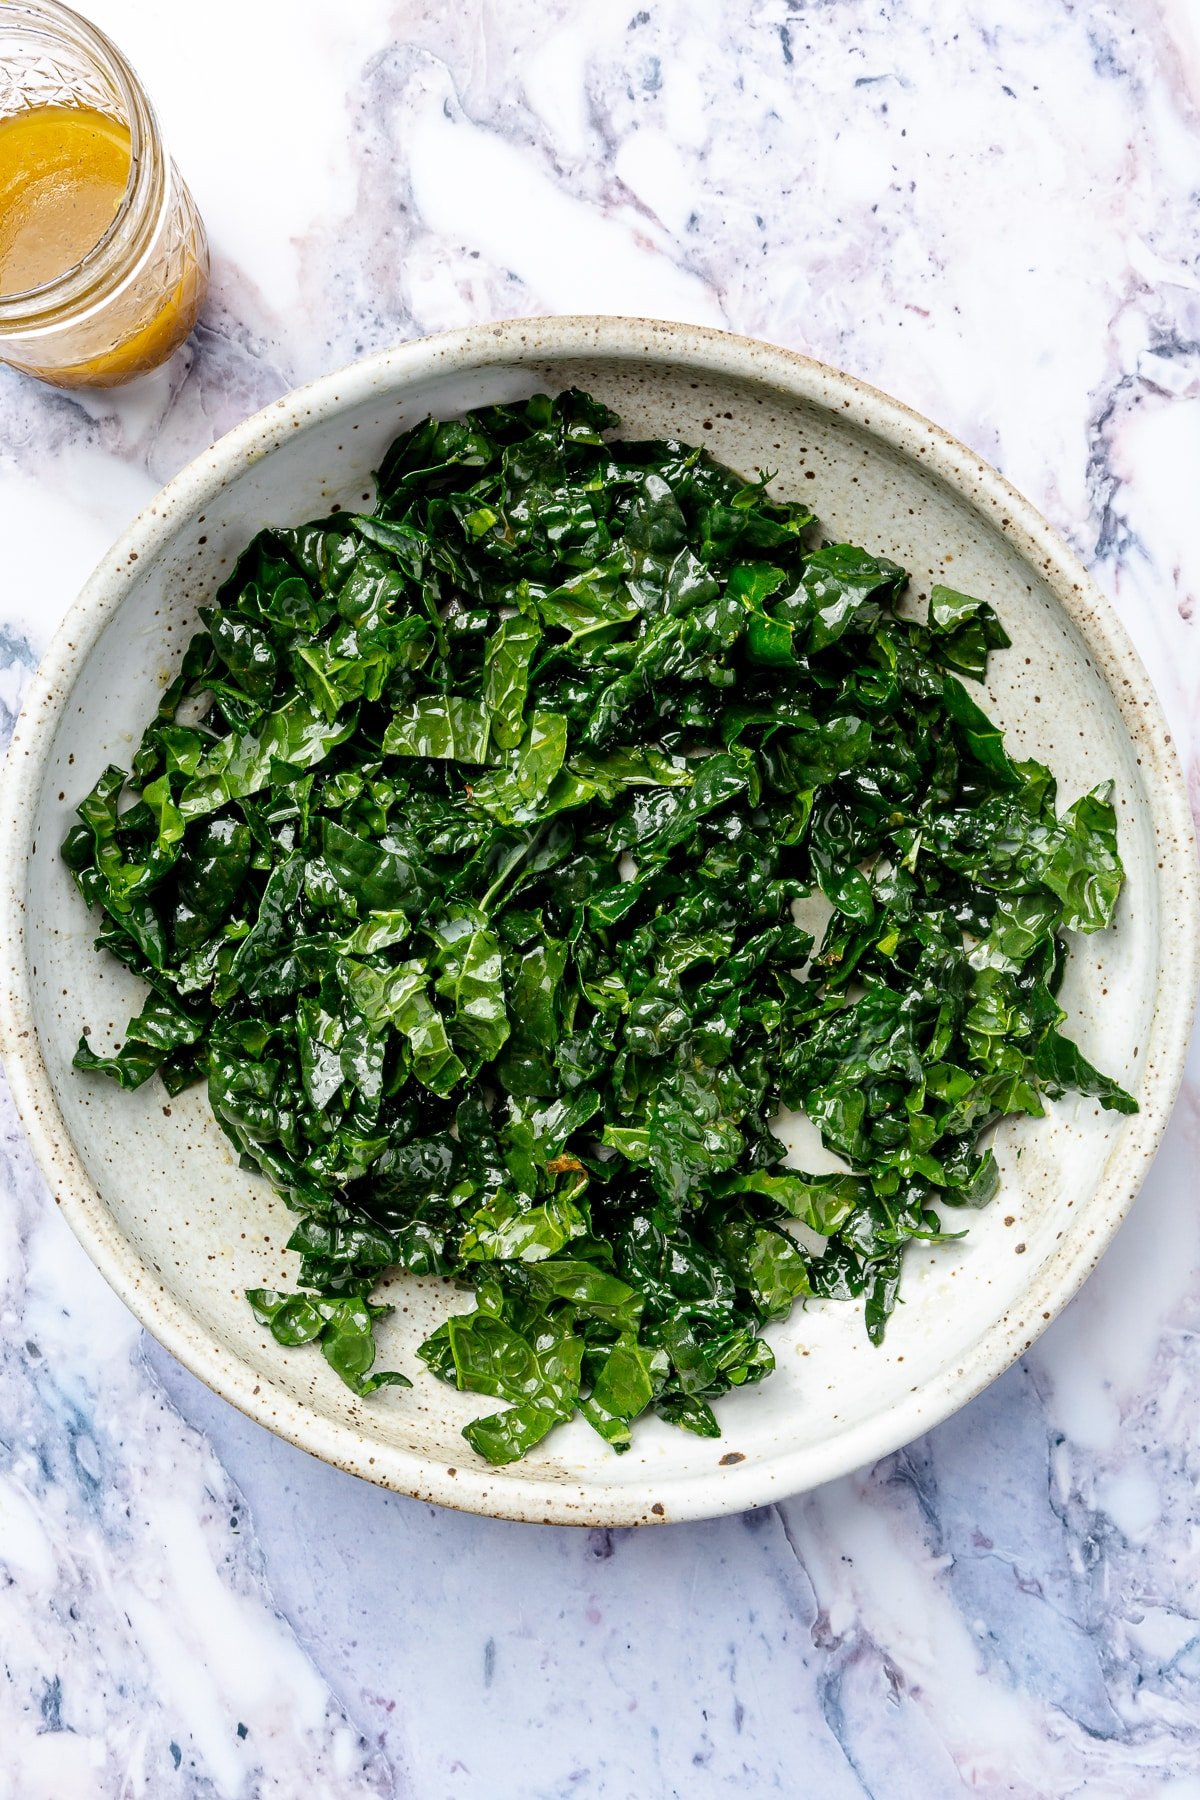 The chopped kale has been placed into a white bowl and covered in the lemon dressing.